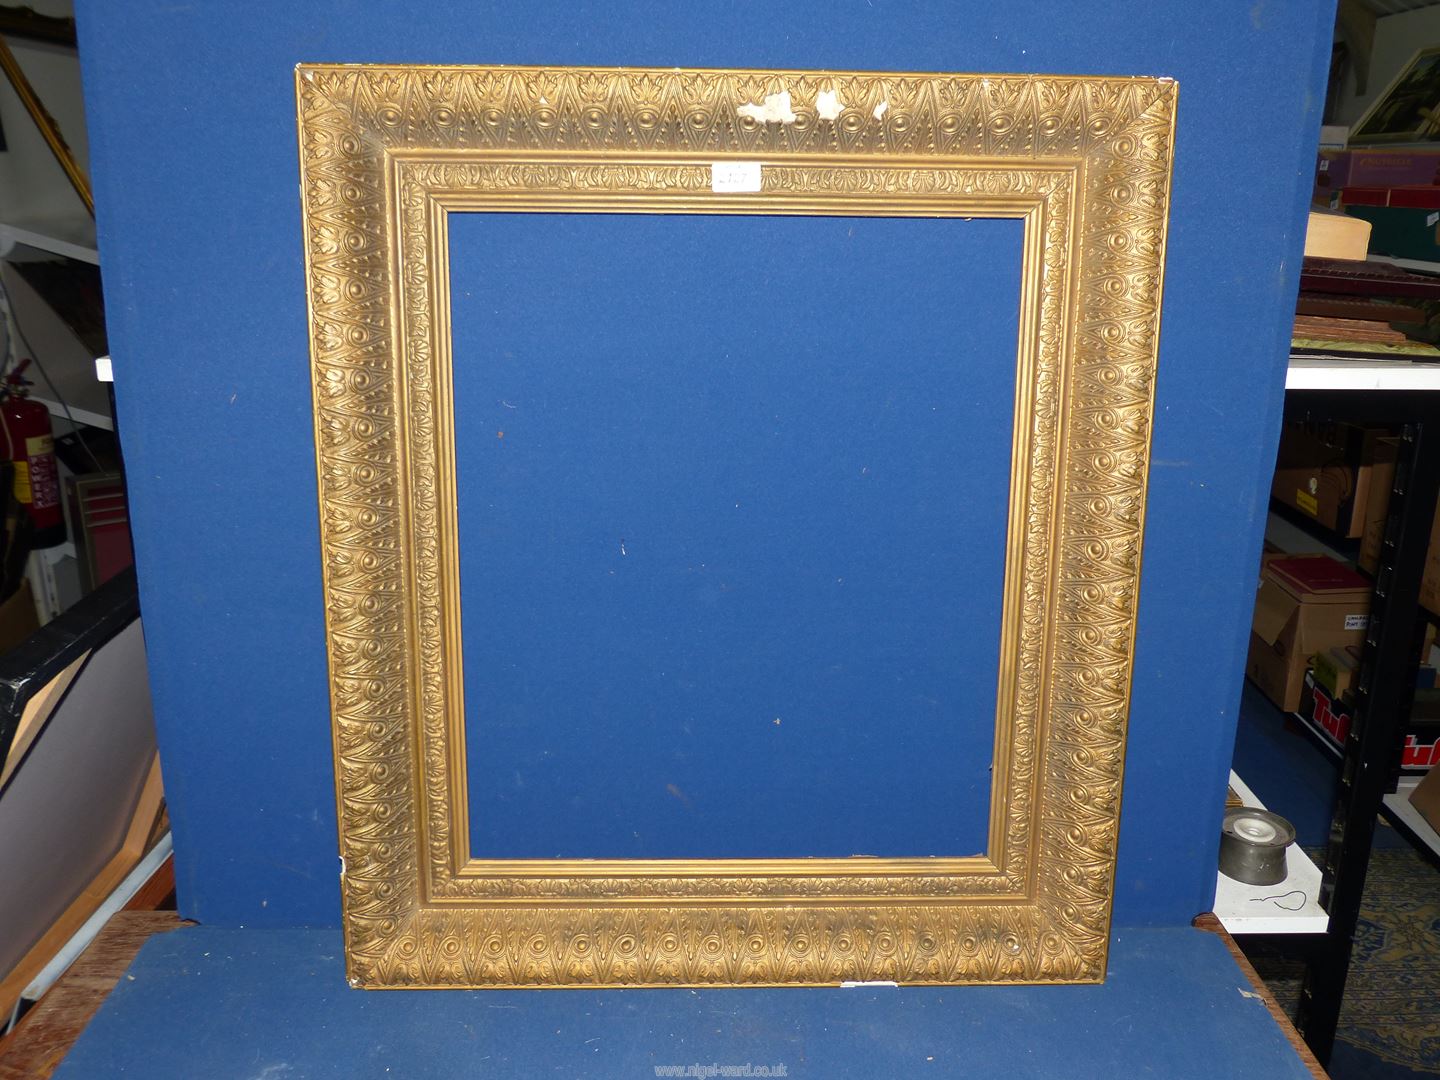 A large heavy ornate gilt frame, overall 2' 6" x 2' 2", aperture 1' 10 1/2" x 1' 6 1/2",